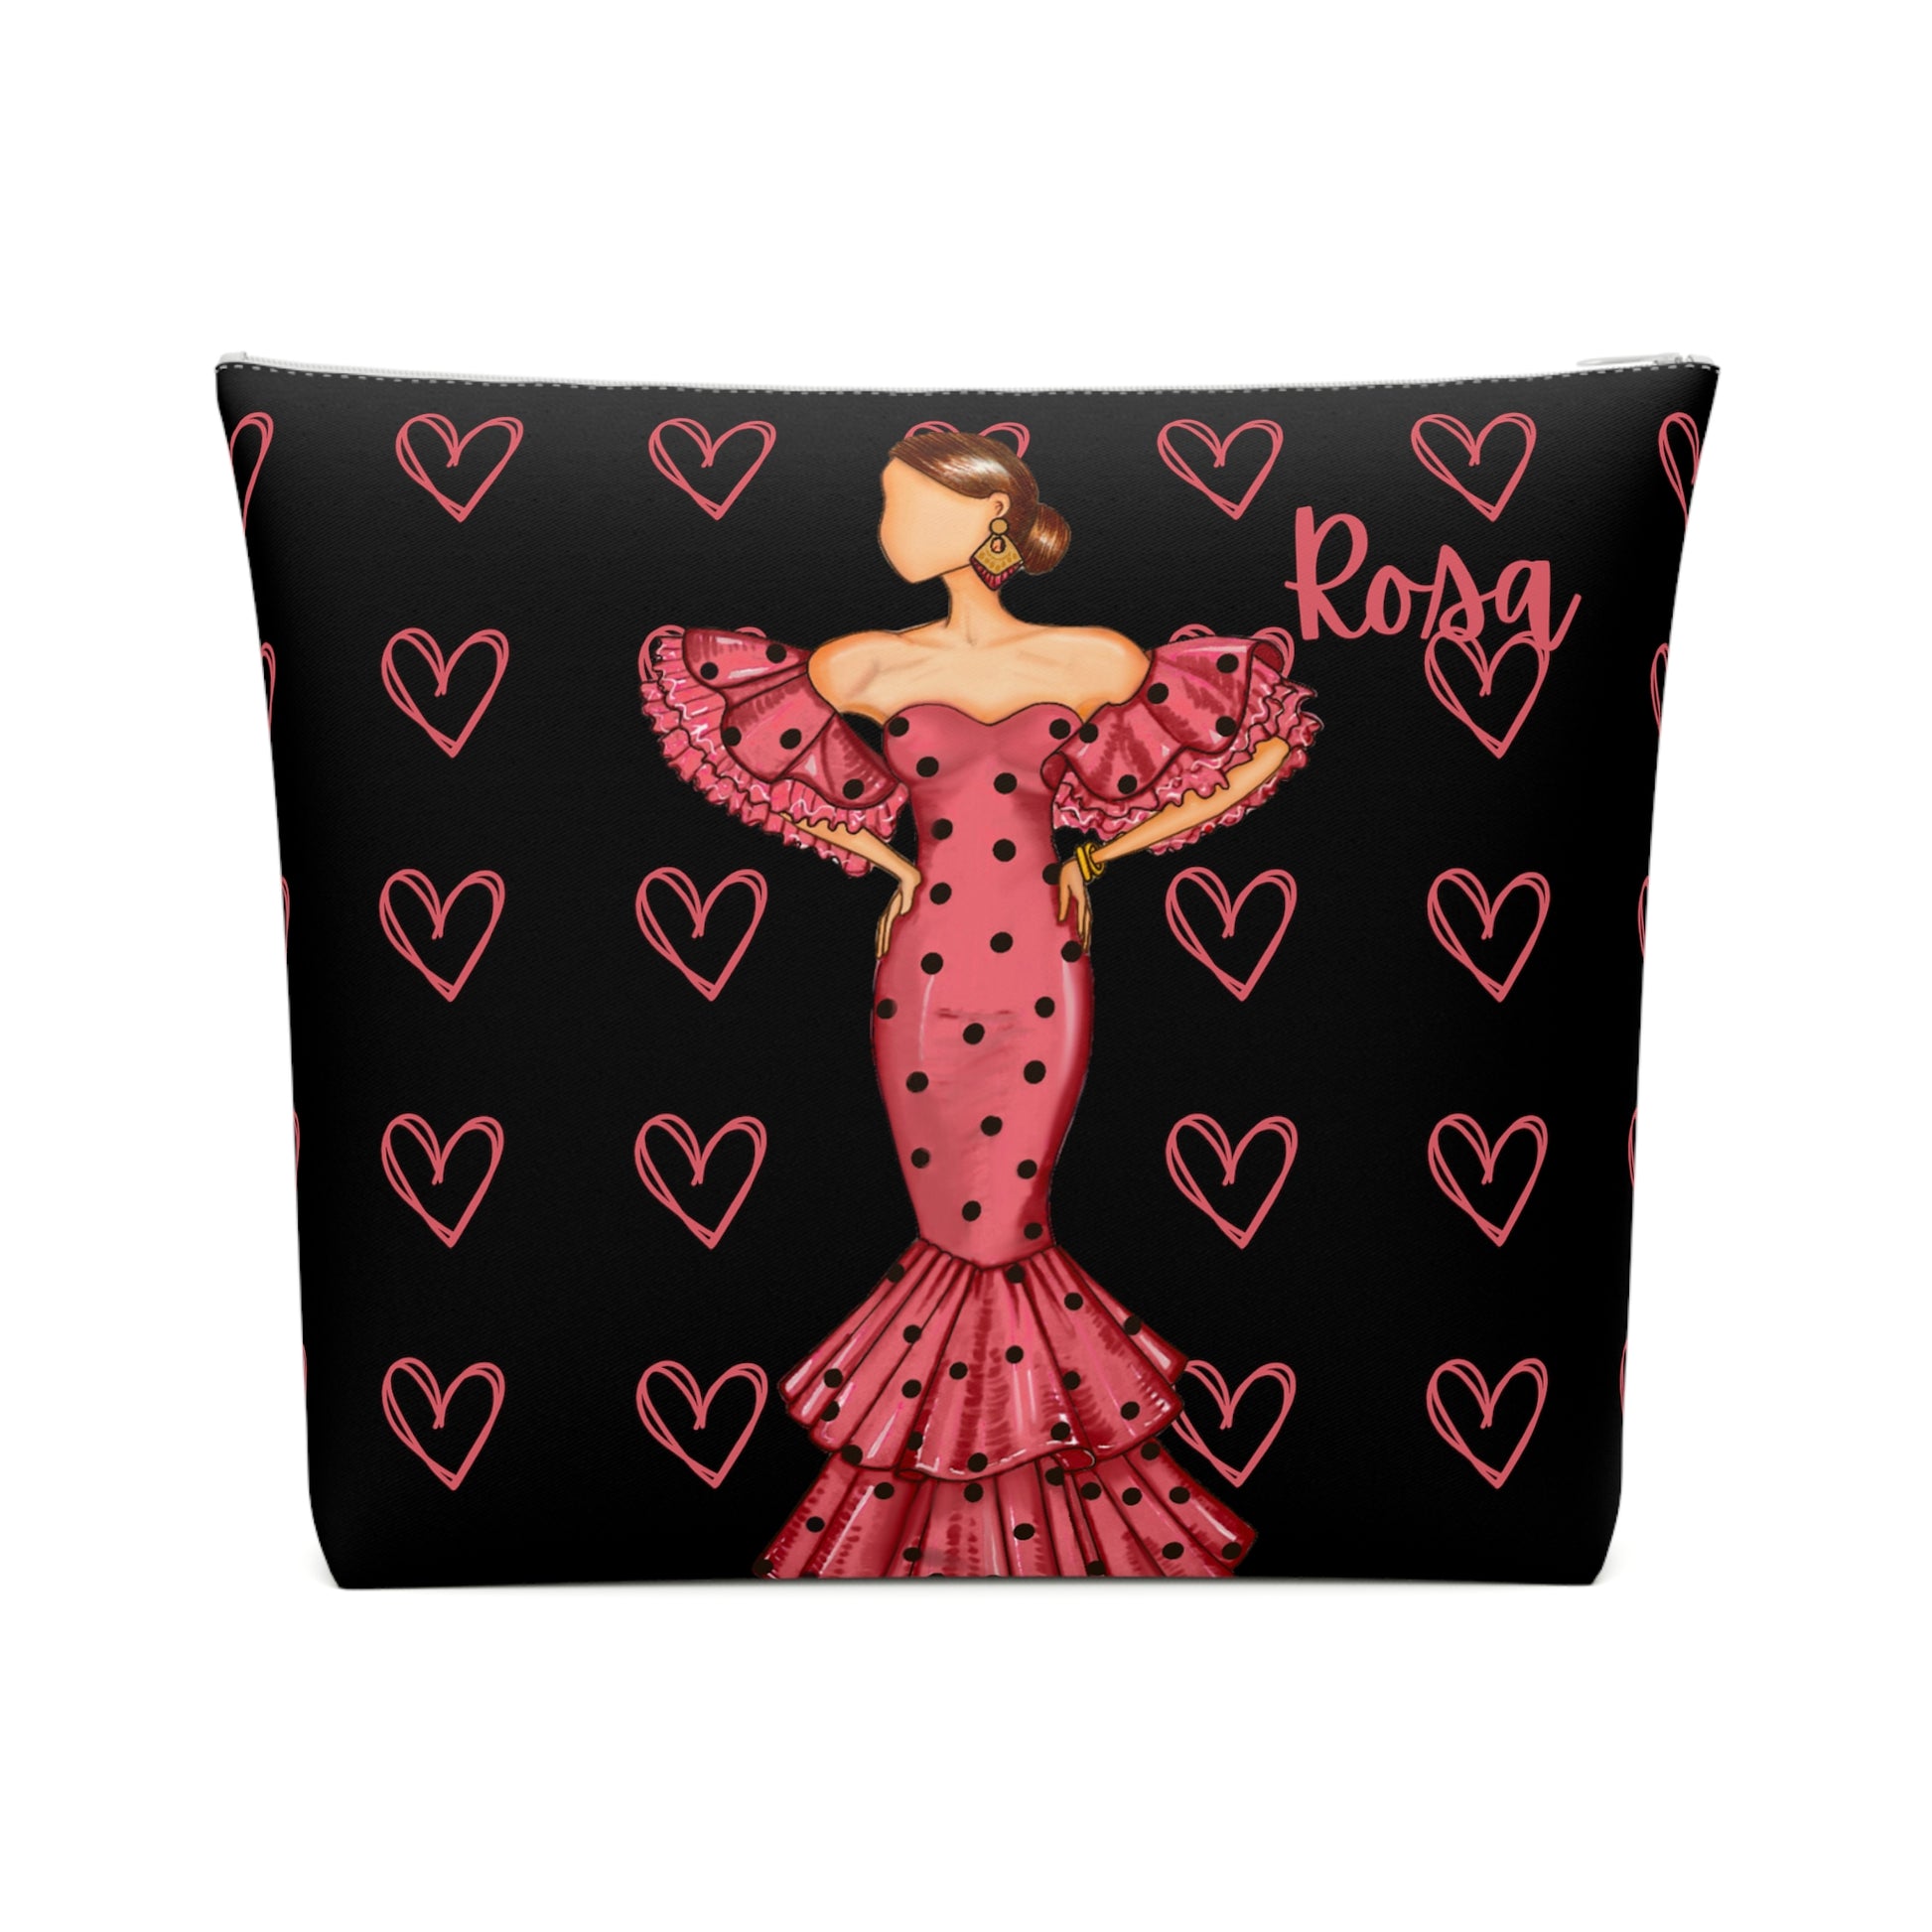 a black and pink pillow with a woman in a pink dress